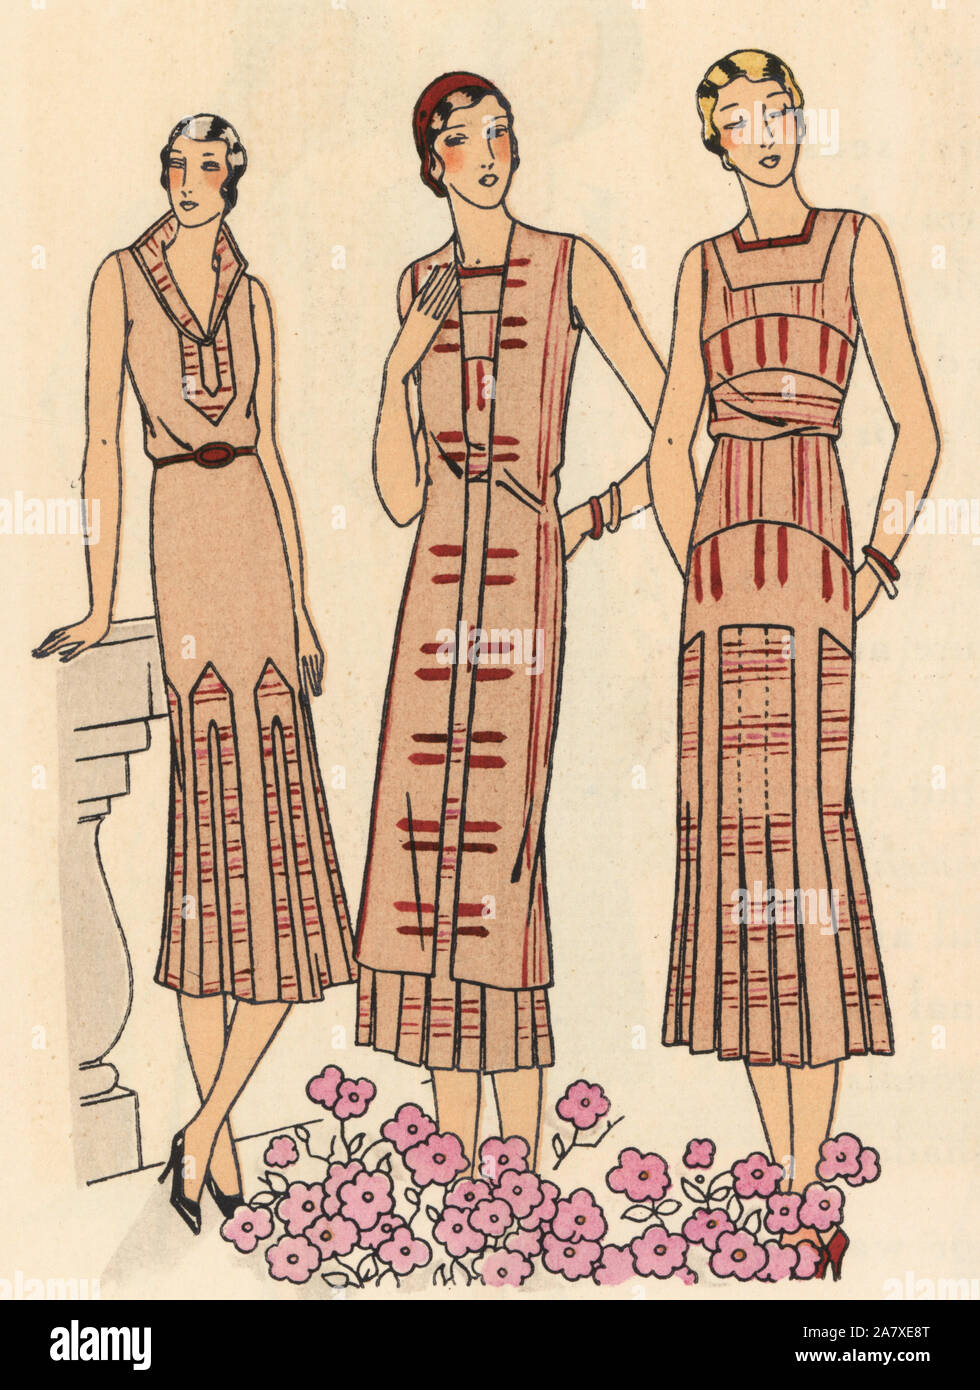 Women in crepe dress with panels in skirt and corsage, woman in ensemble of shirt-crepe, and woman in patterned shirt dress. Handcolored pochoir (stencil) lithograph from the French luxury fashion magazine Art, Gout, Beaute, 1931. Stock Photo